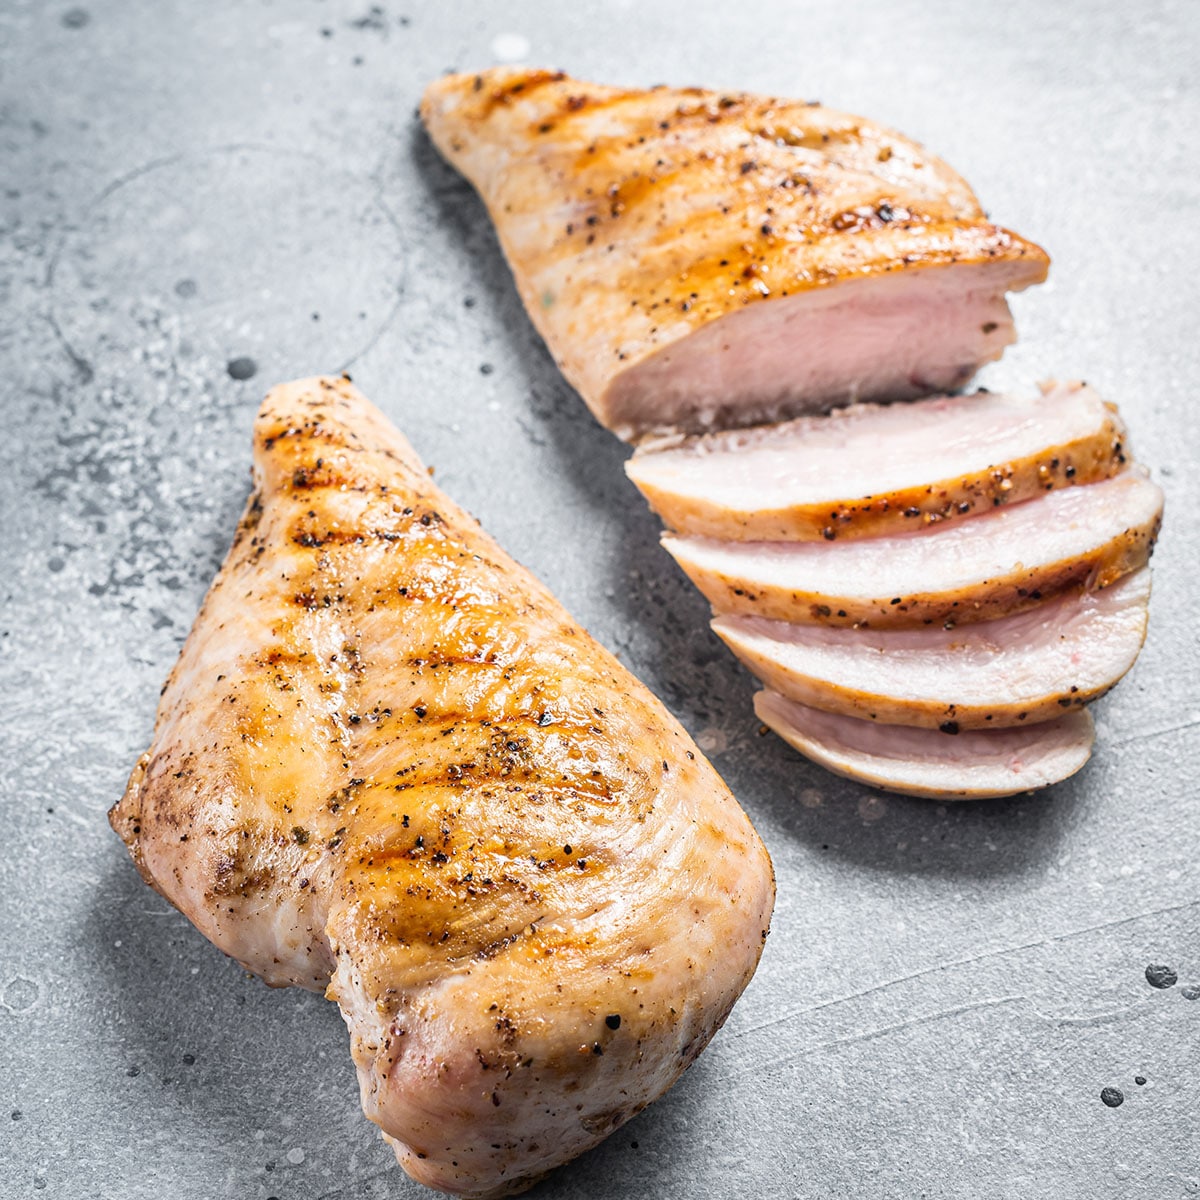 Can you eat cold chicken? Sure you can. If you do this, make sure the chicken does not stay at room temperature.